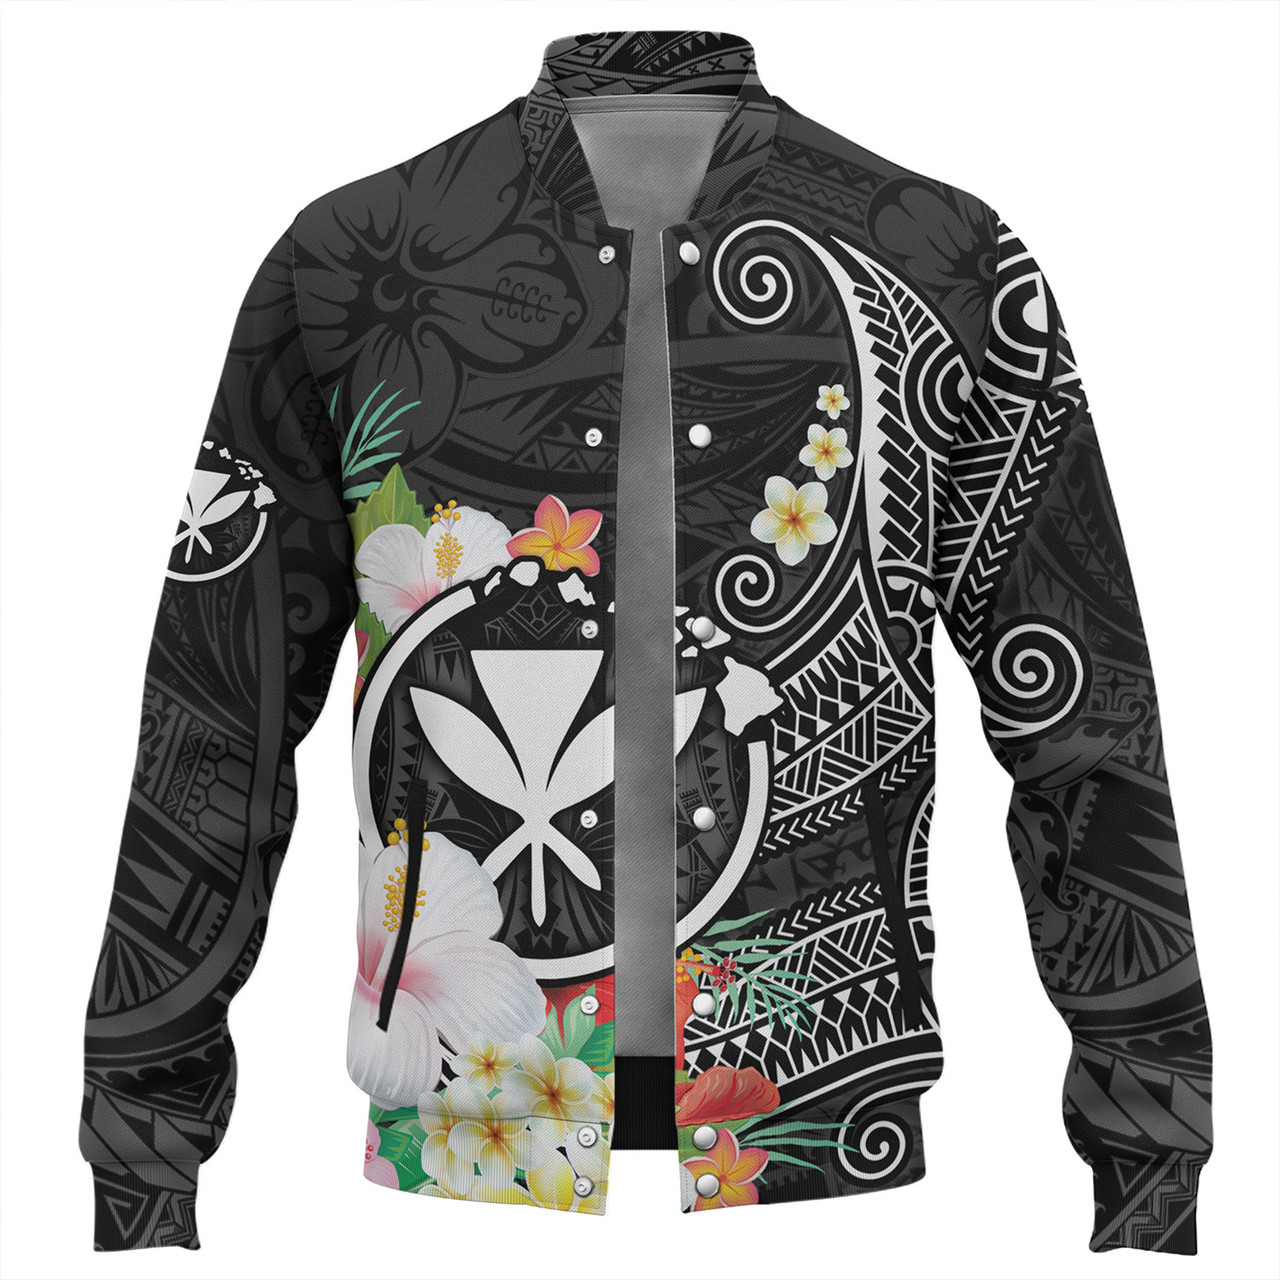 Hawaii Baseball Jacket Custom Polynesian Curve Pattern Design With Tropical Floral Collection